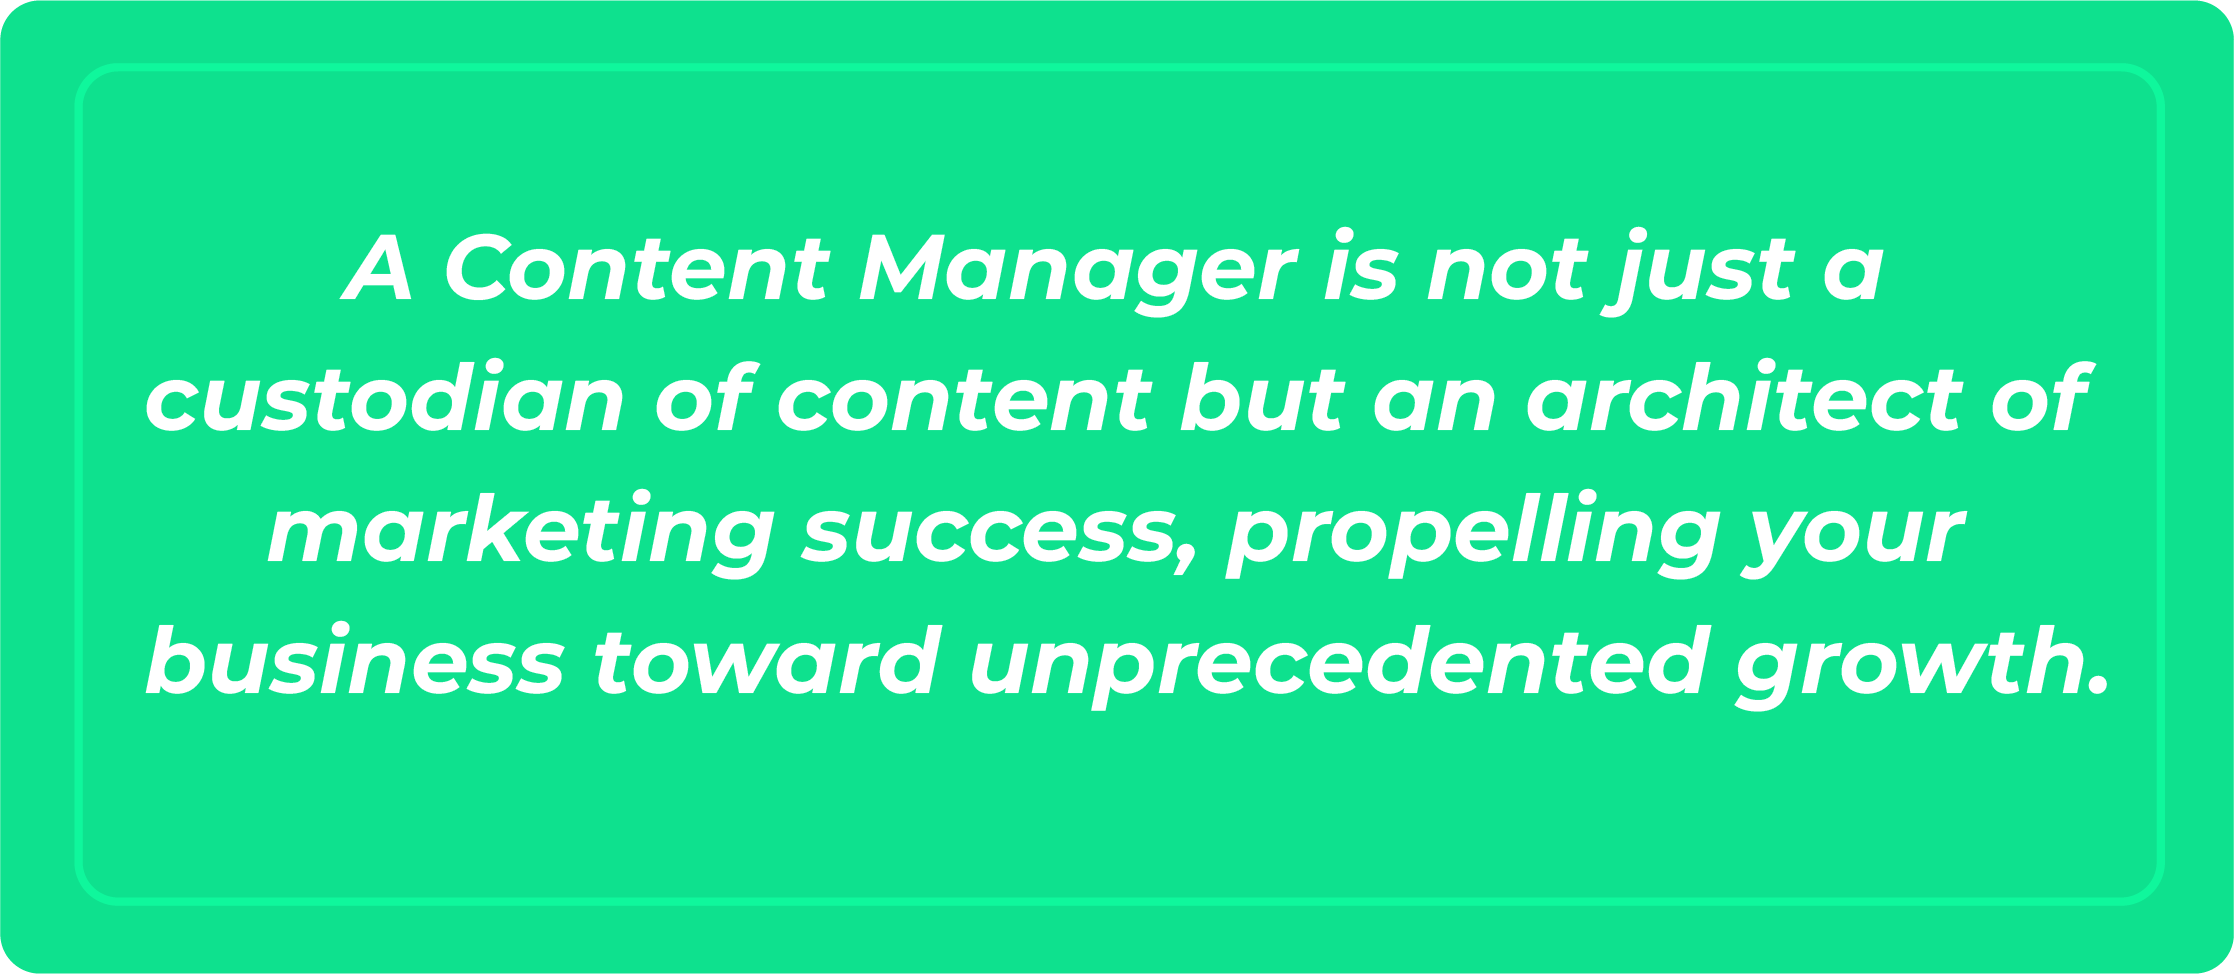 A Content Manager is not just a custodian of content but an architect of  marketing success, propelling your business toward unprecedented growth.